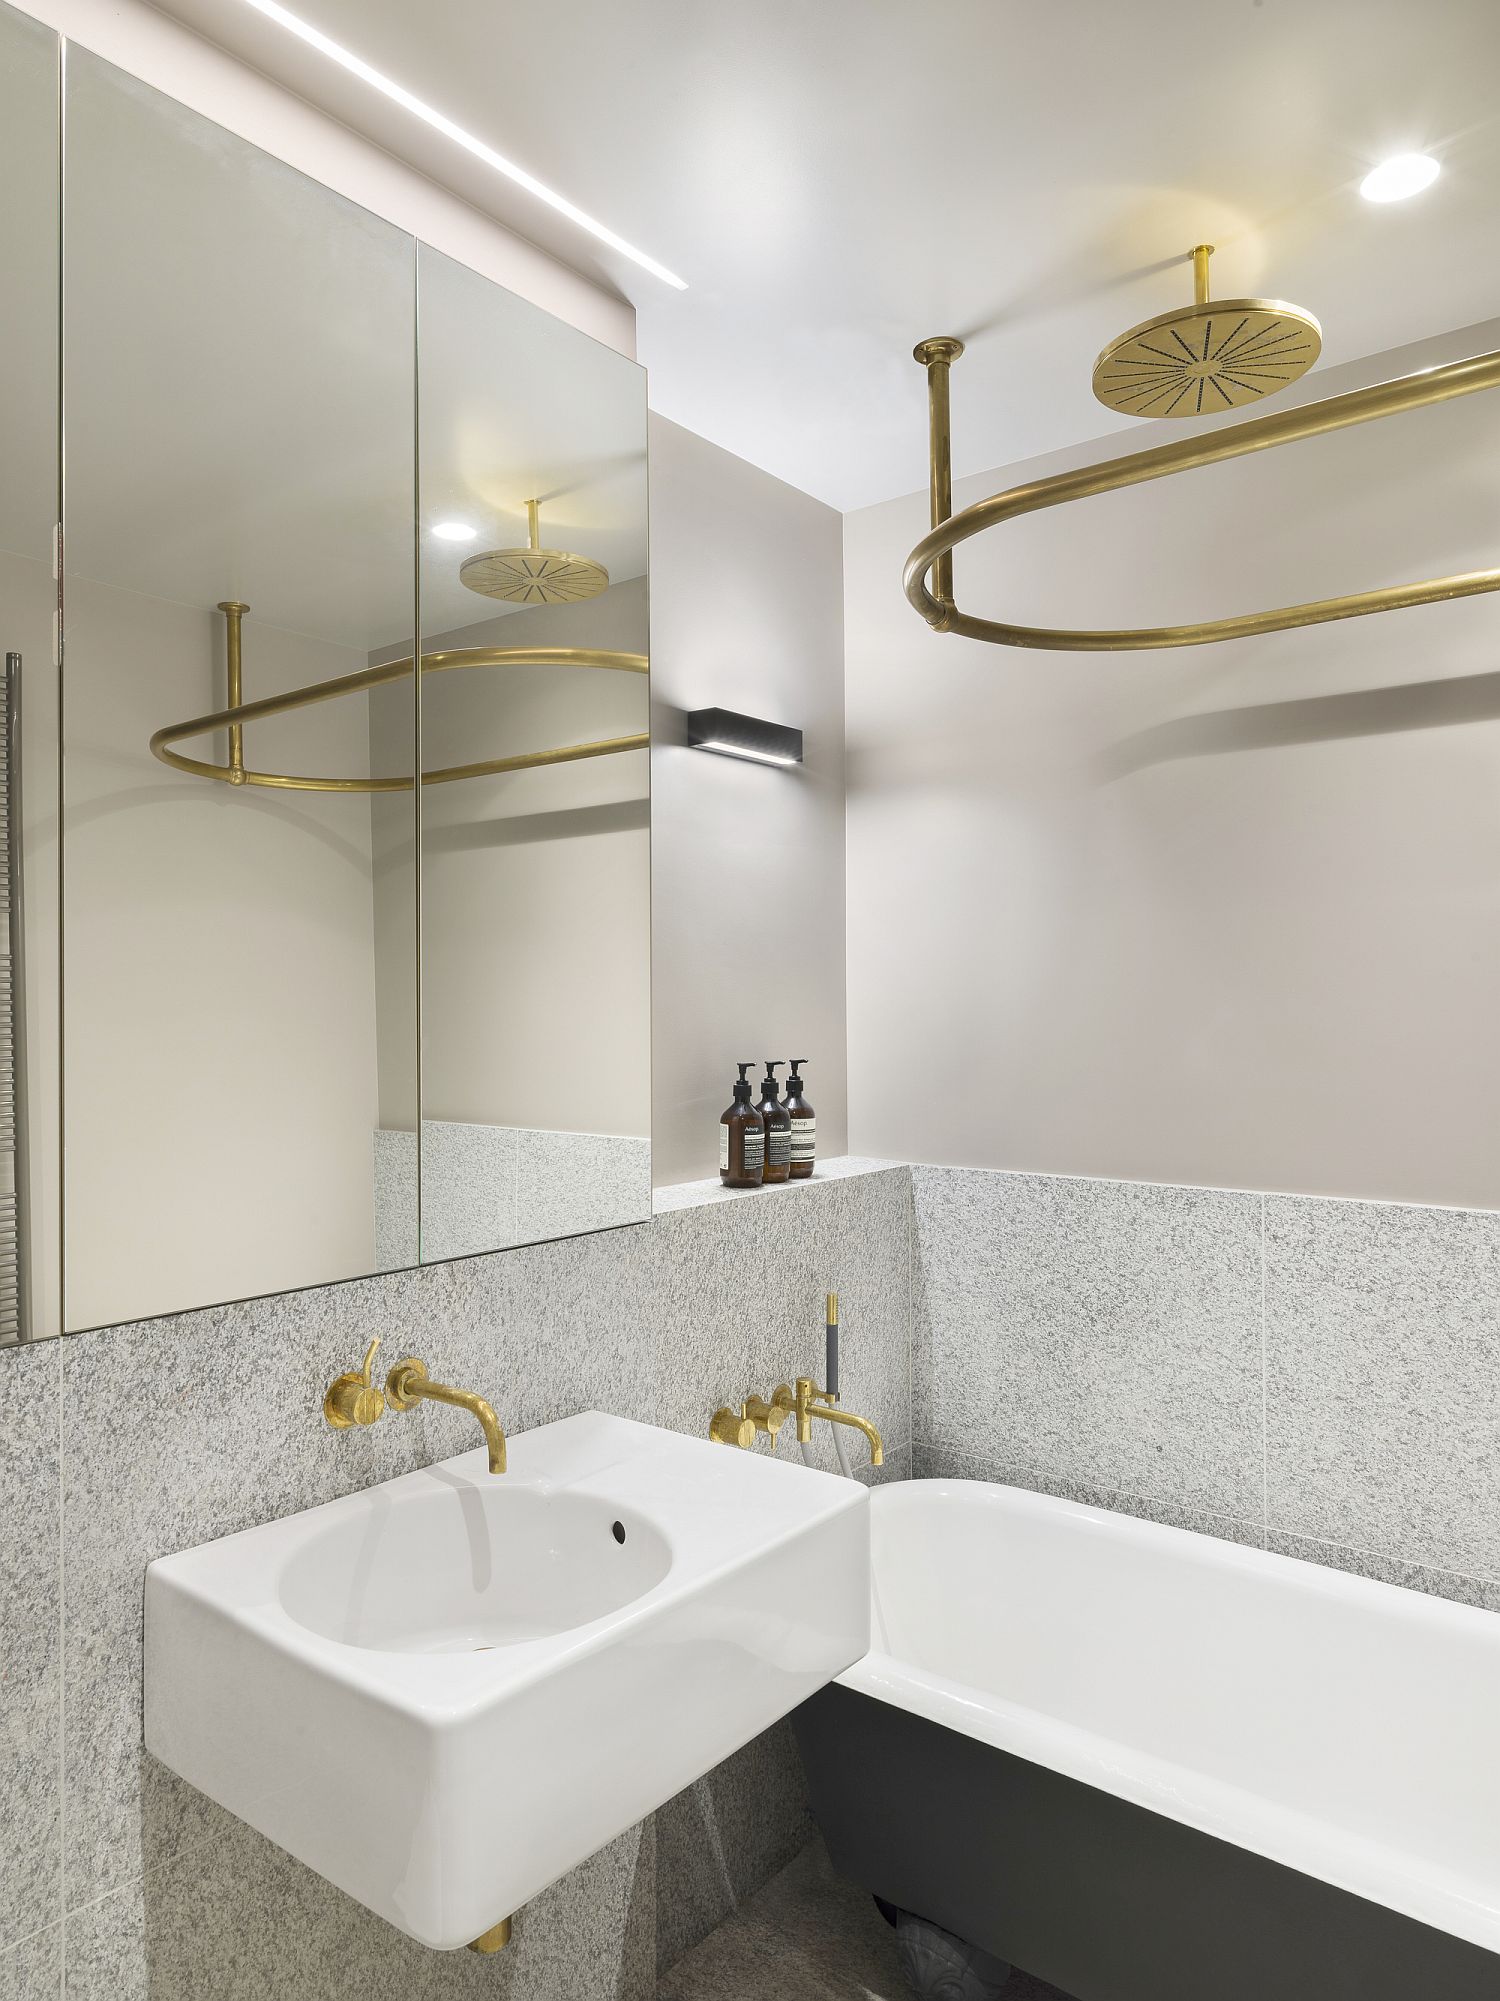 Brass fixtures add golden glint to the bathroom in white